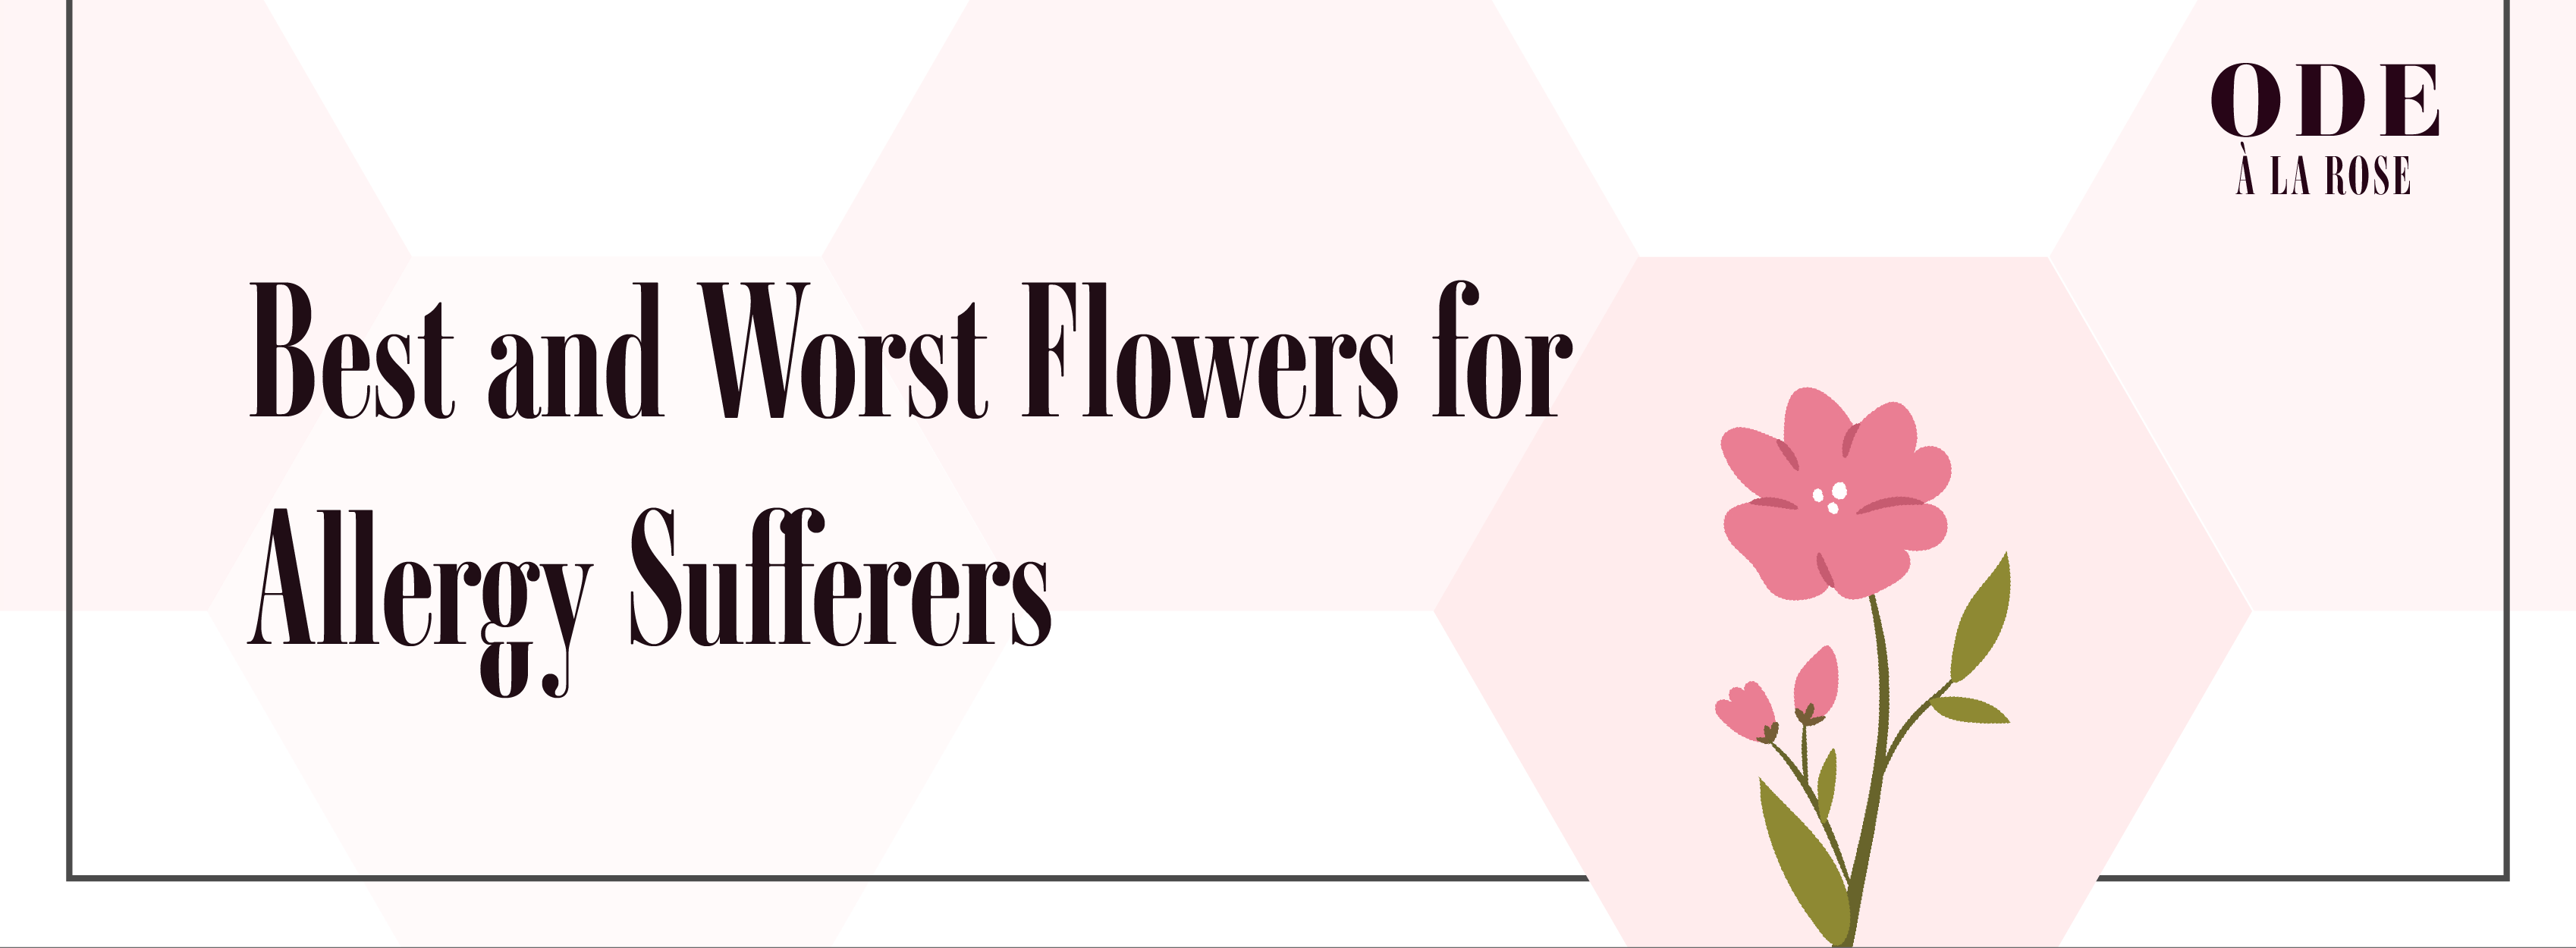 best and worst flowers for allergies